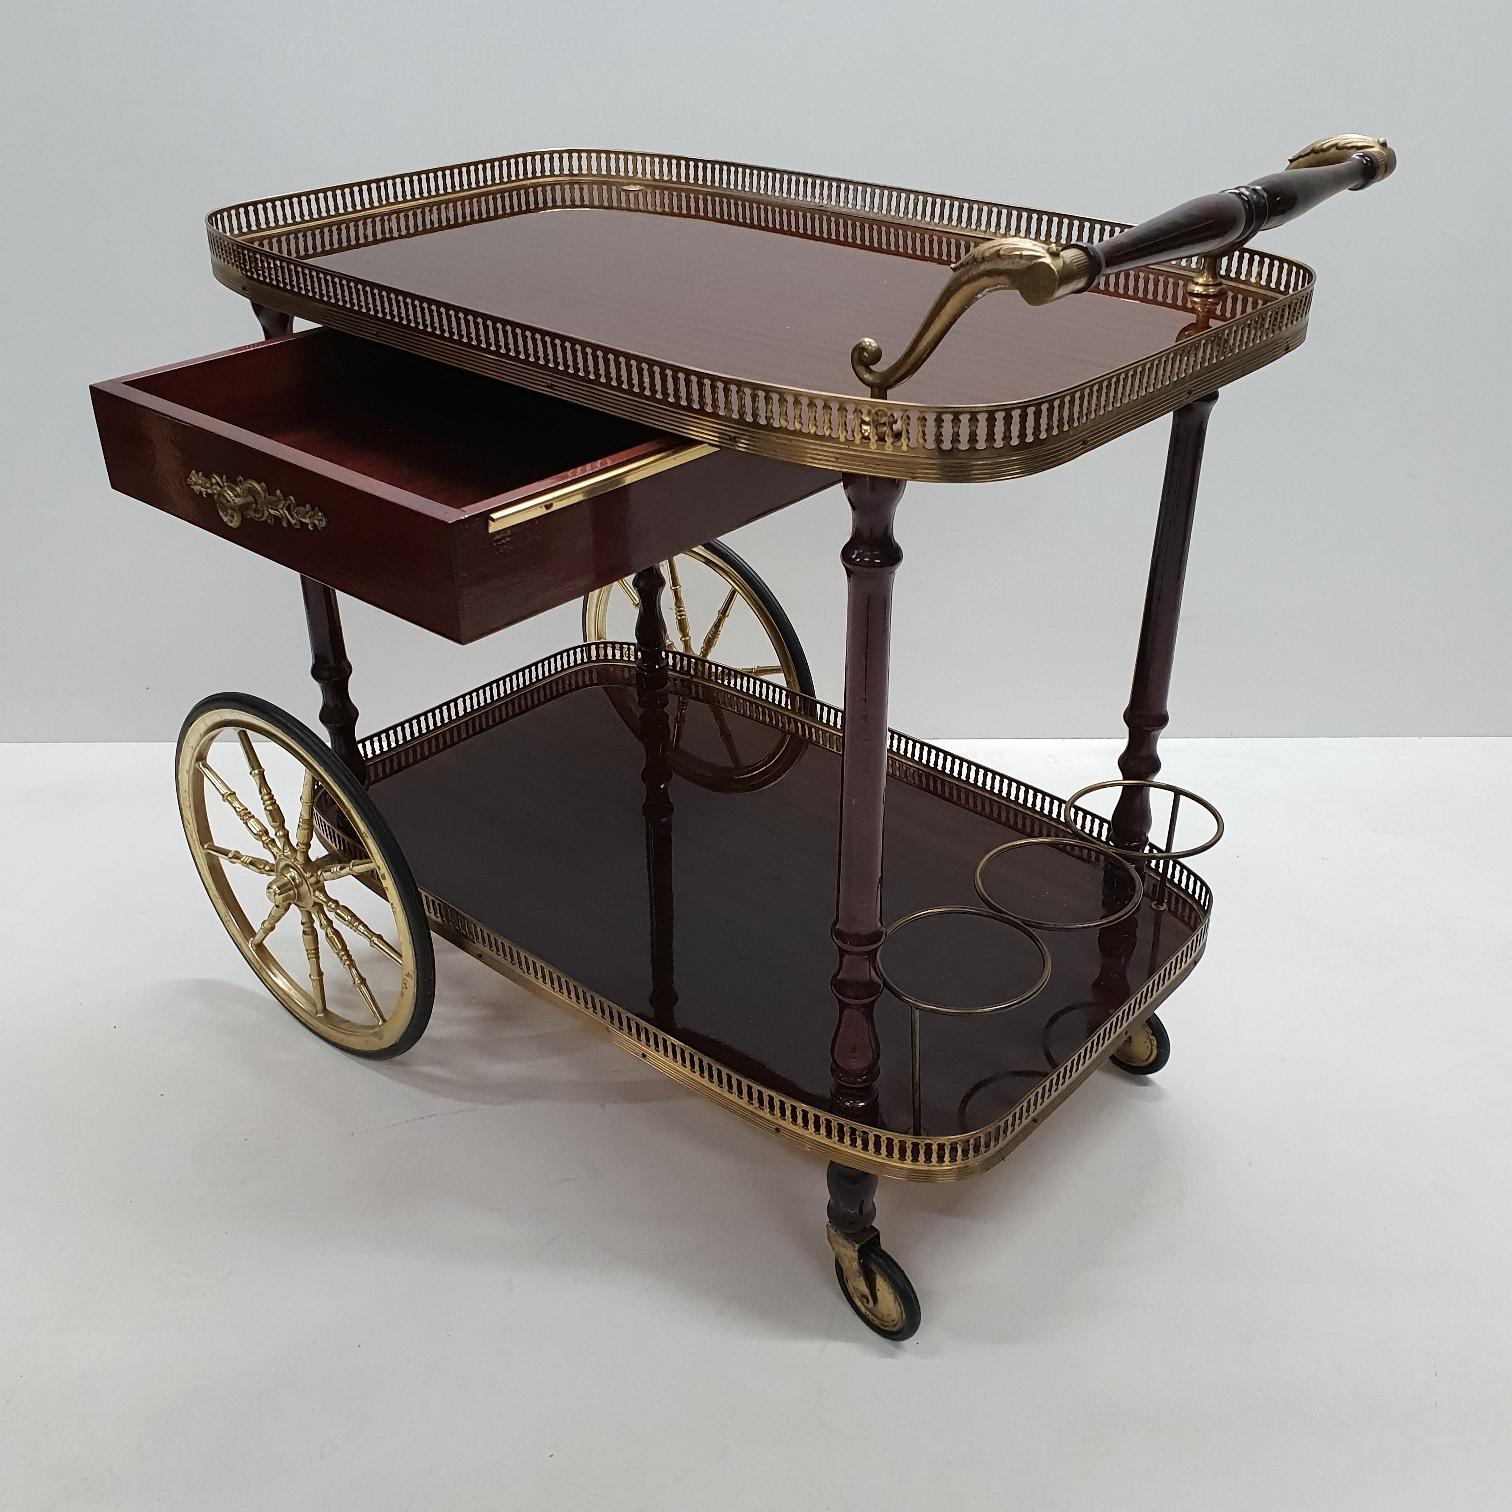 Brass neoclassical serving trolley bar cart with drawer, 1960s.
The drawer can open on both sides.
French design.